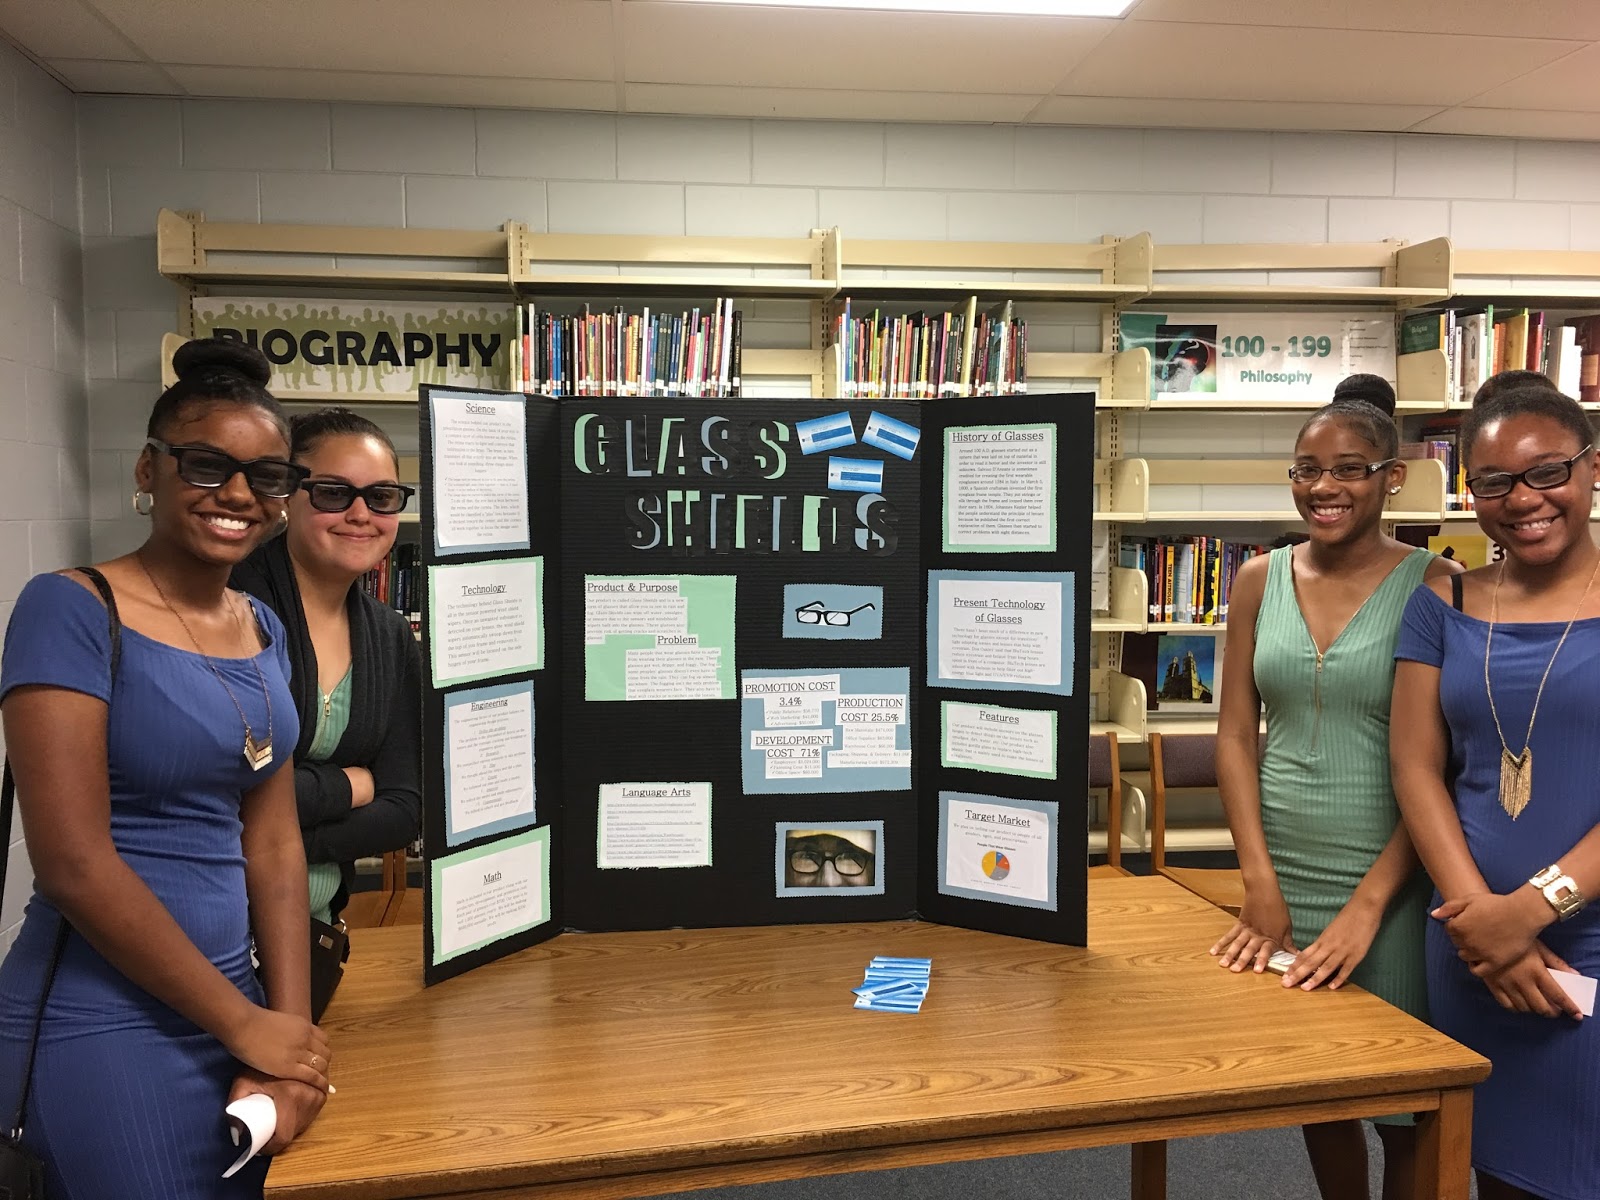 capstone project topics for stem students